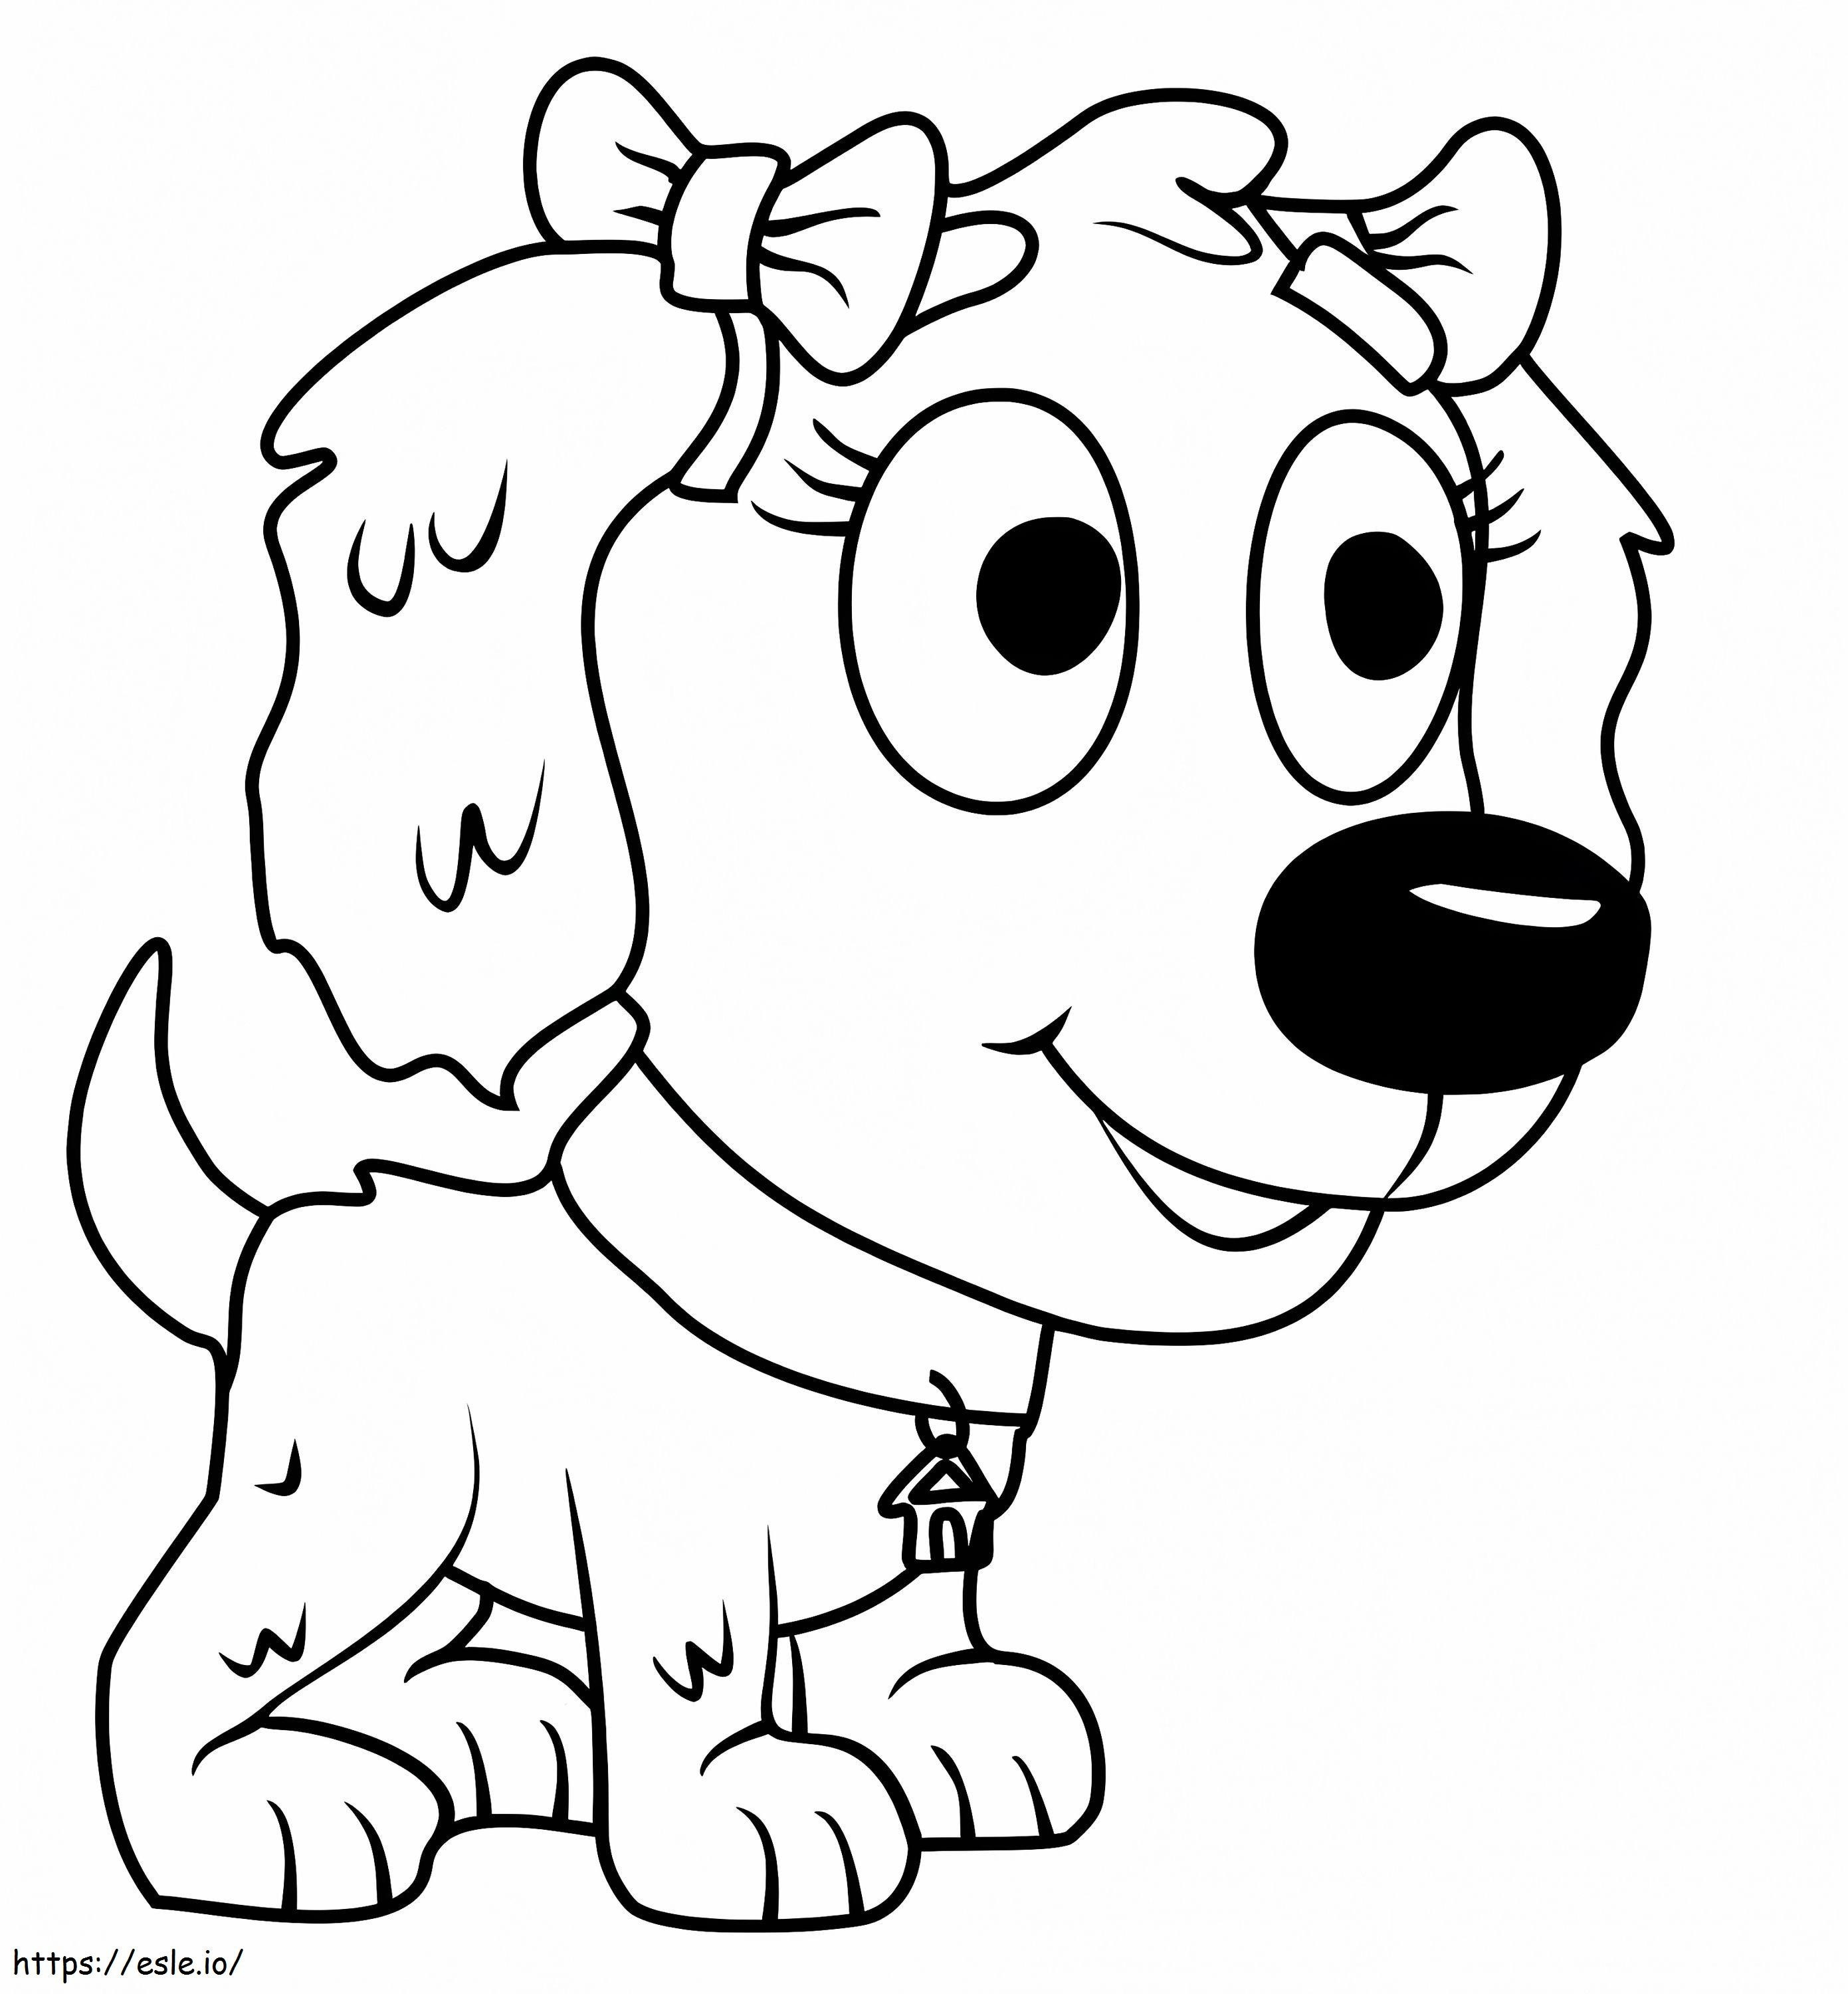 Sweet Pea From Pound Puppies coloring page